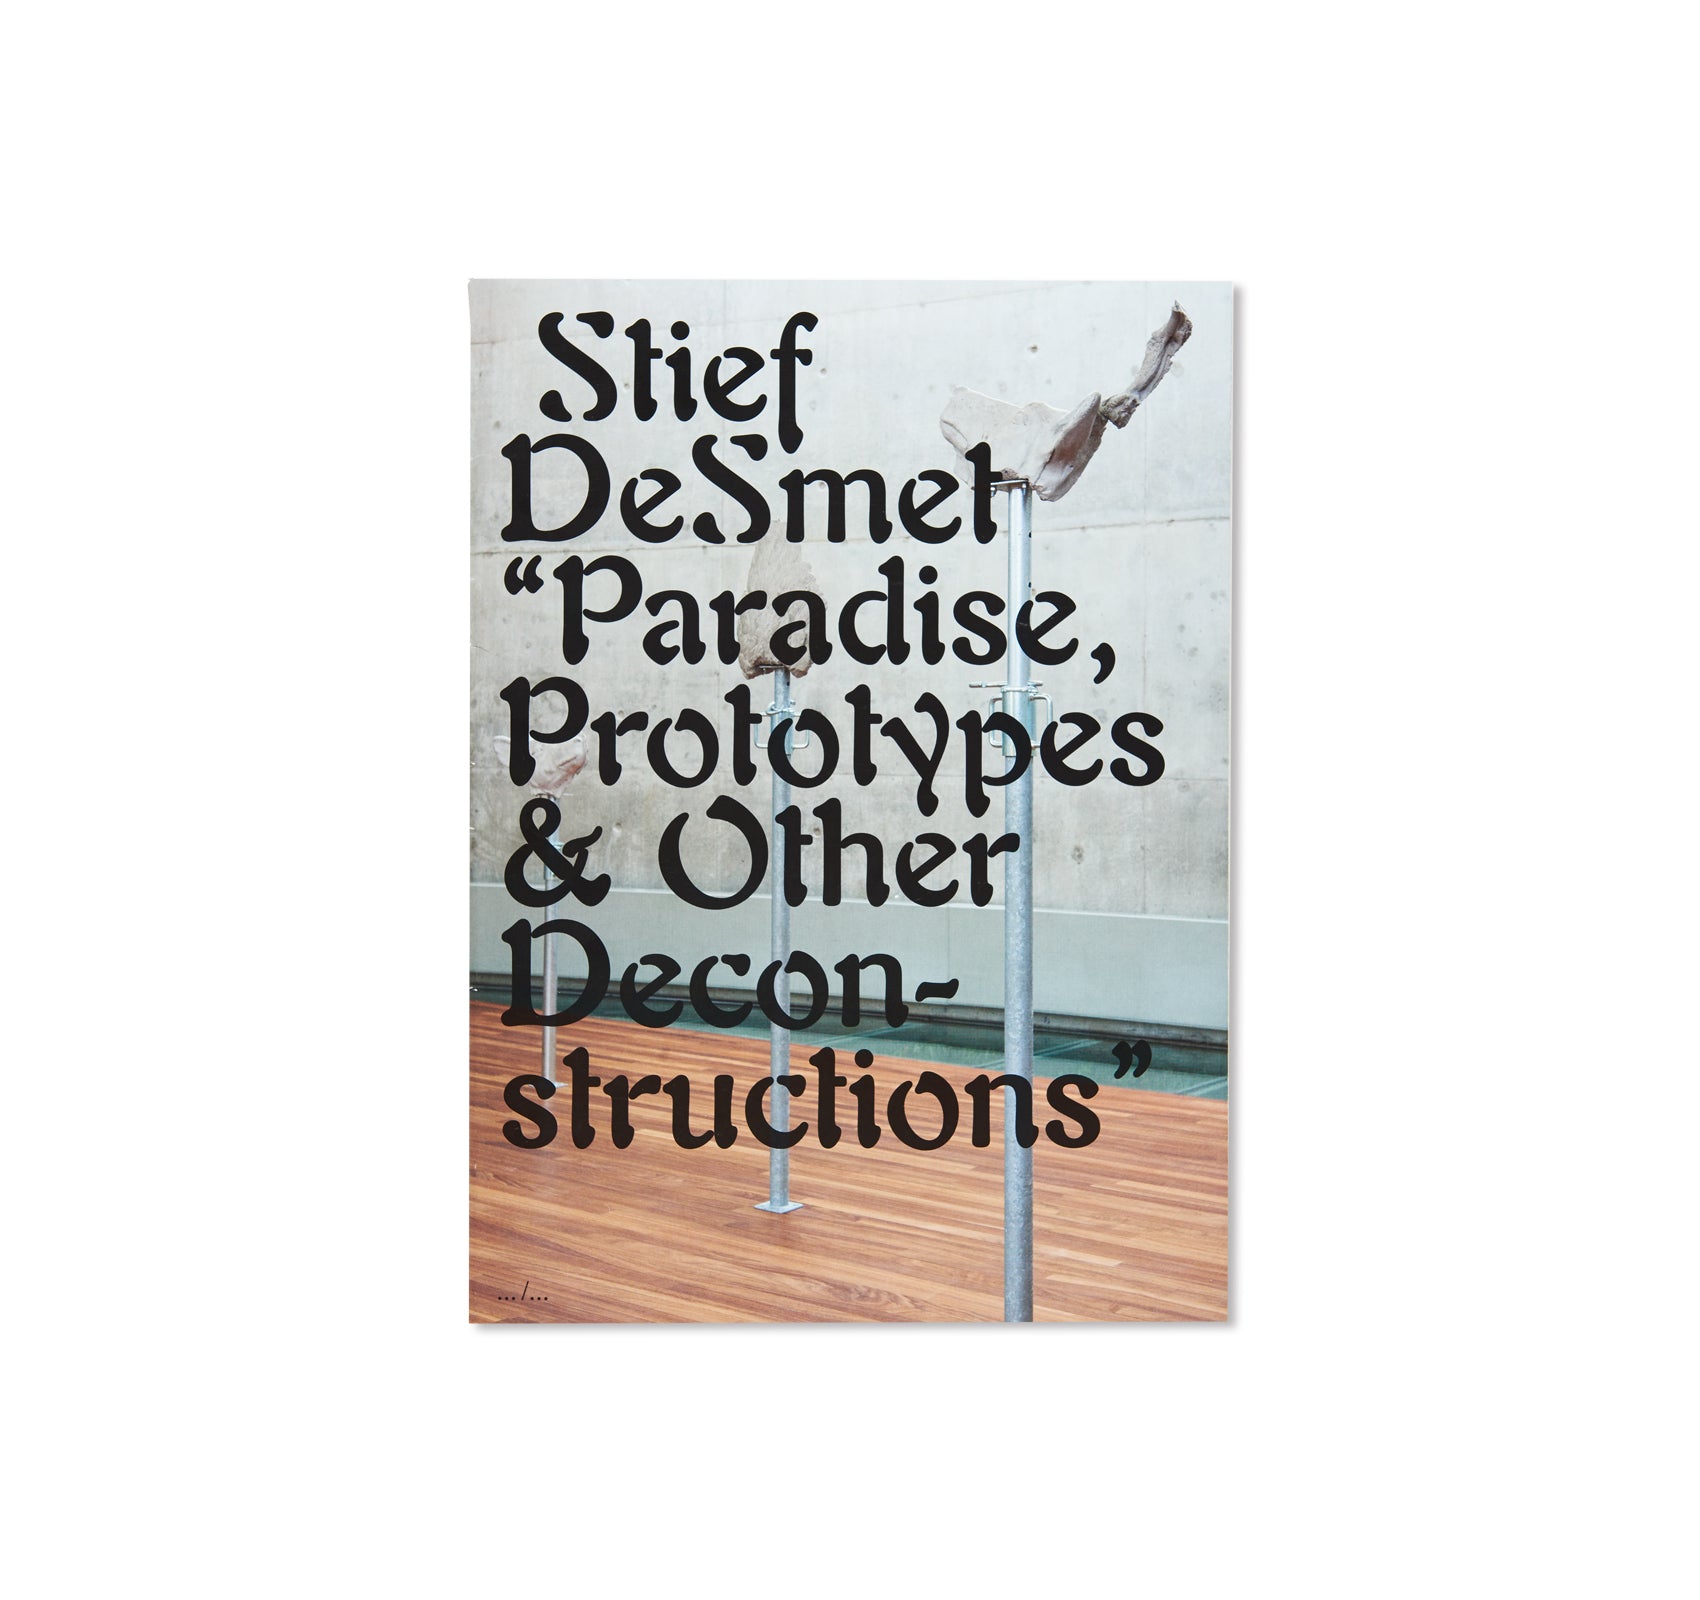 PARADISE, PROTOTYPES & OTHER DECONSTRUCTIONS by Stief DeSmet